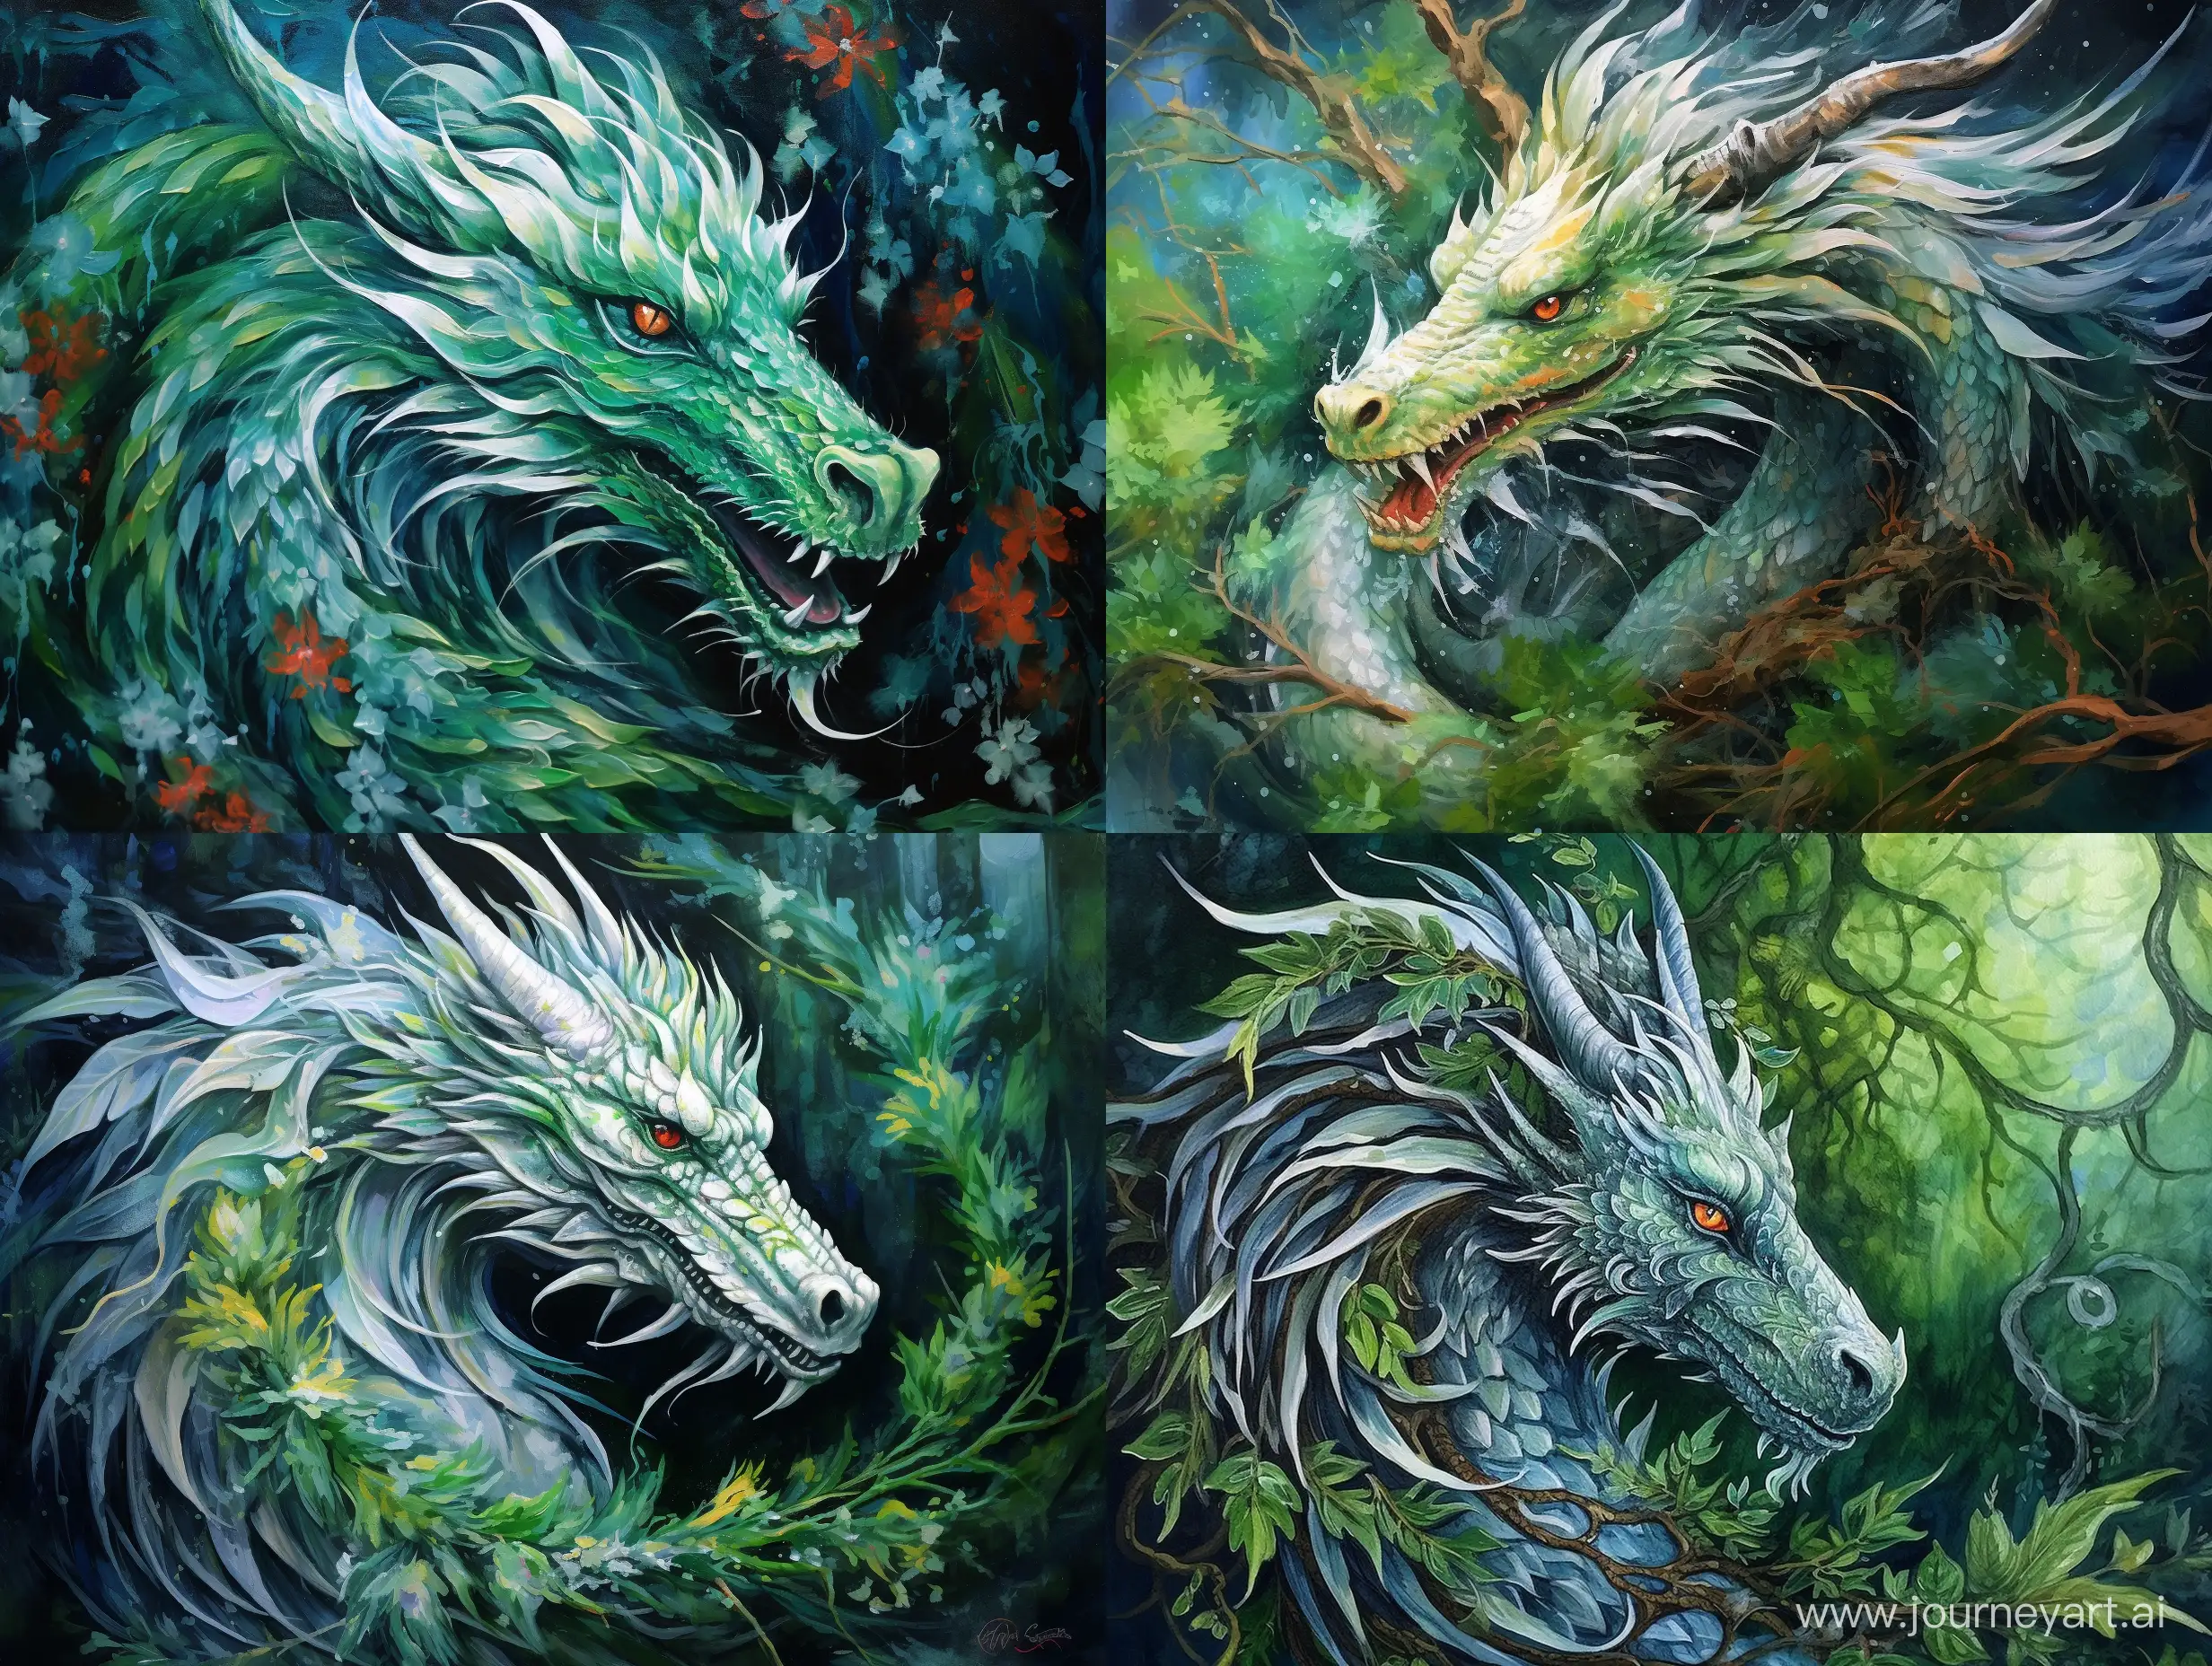 Majestic-Green-Dragon-Painting-Symbol-of-New-Year-in-Vibrant-Acrylic-Colors